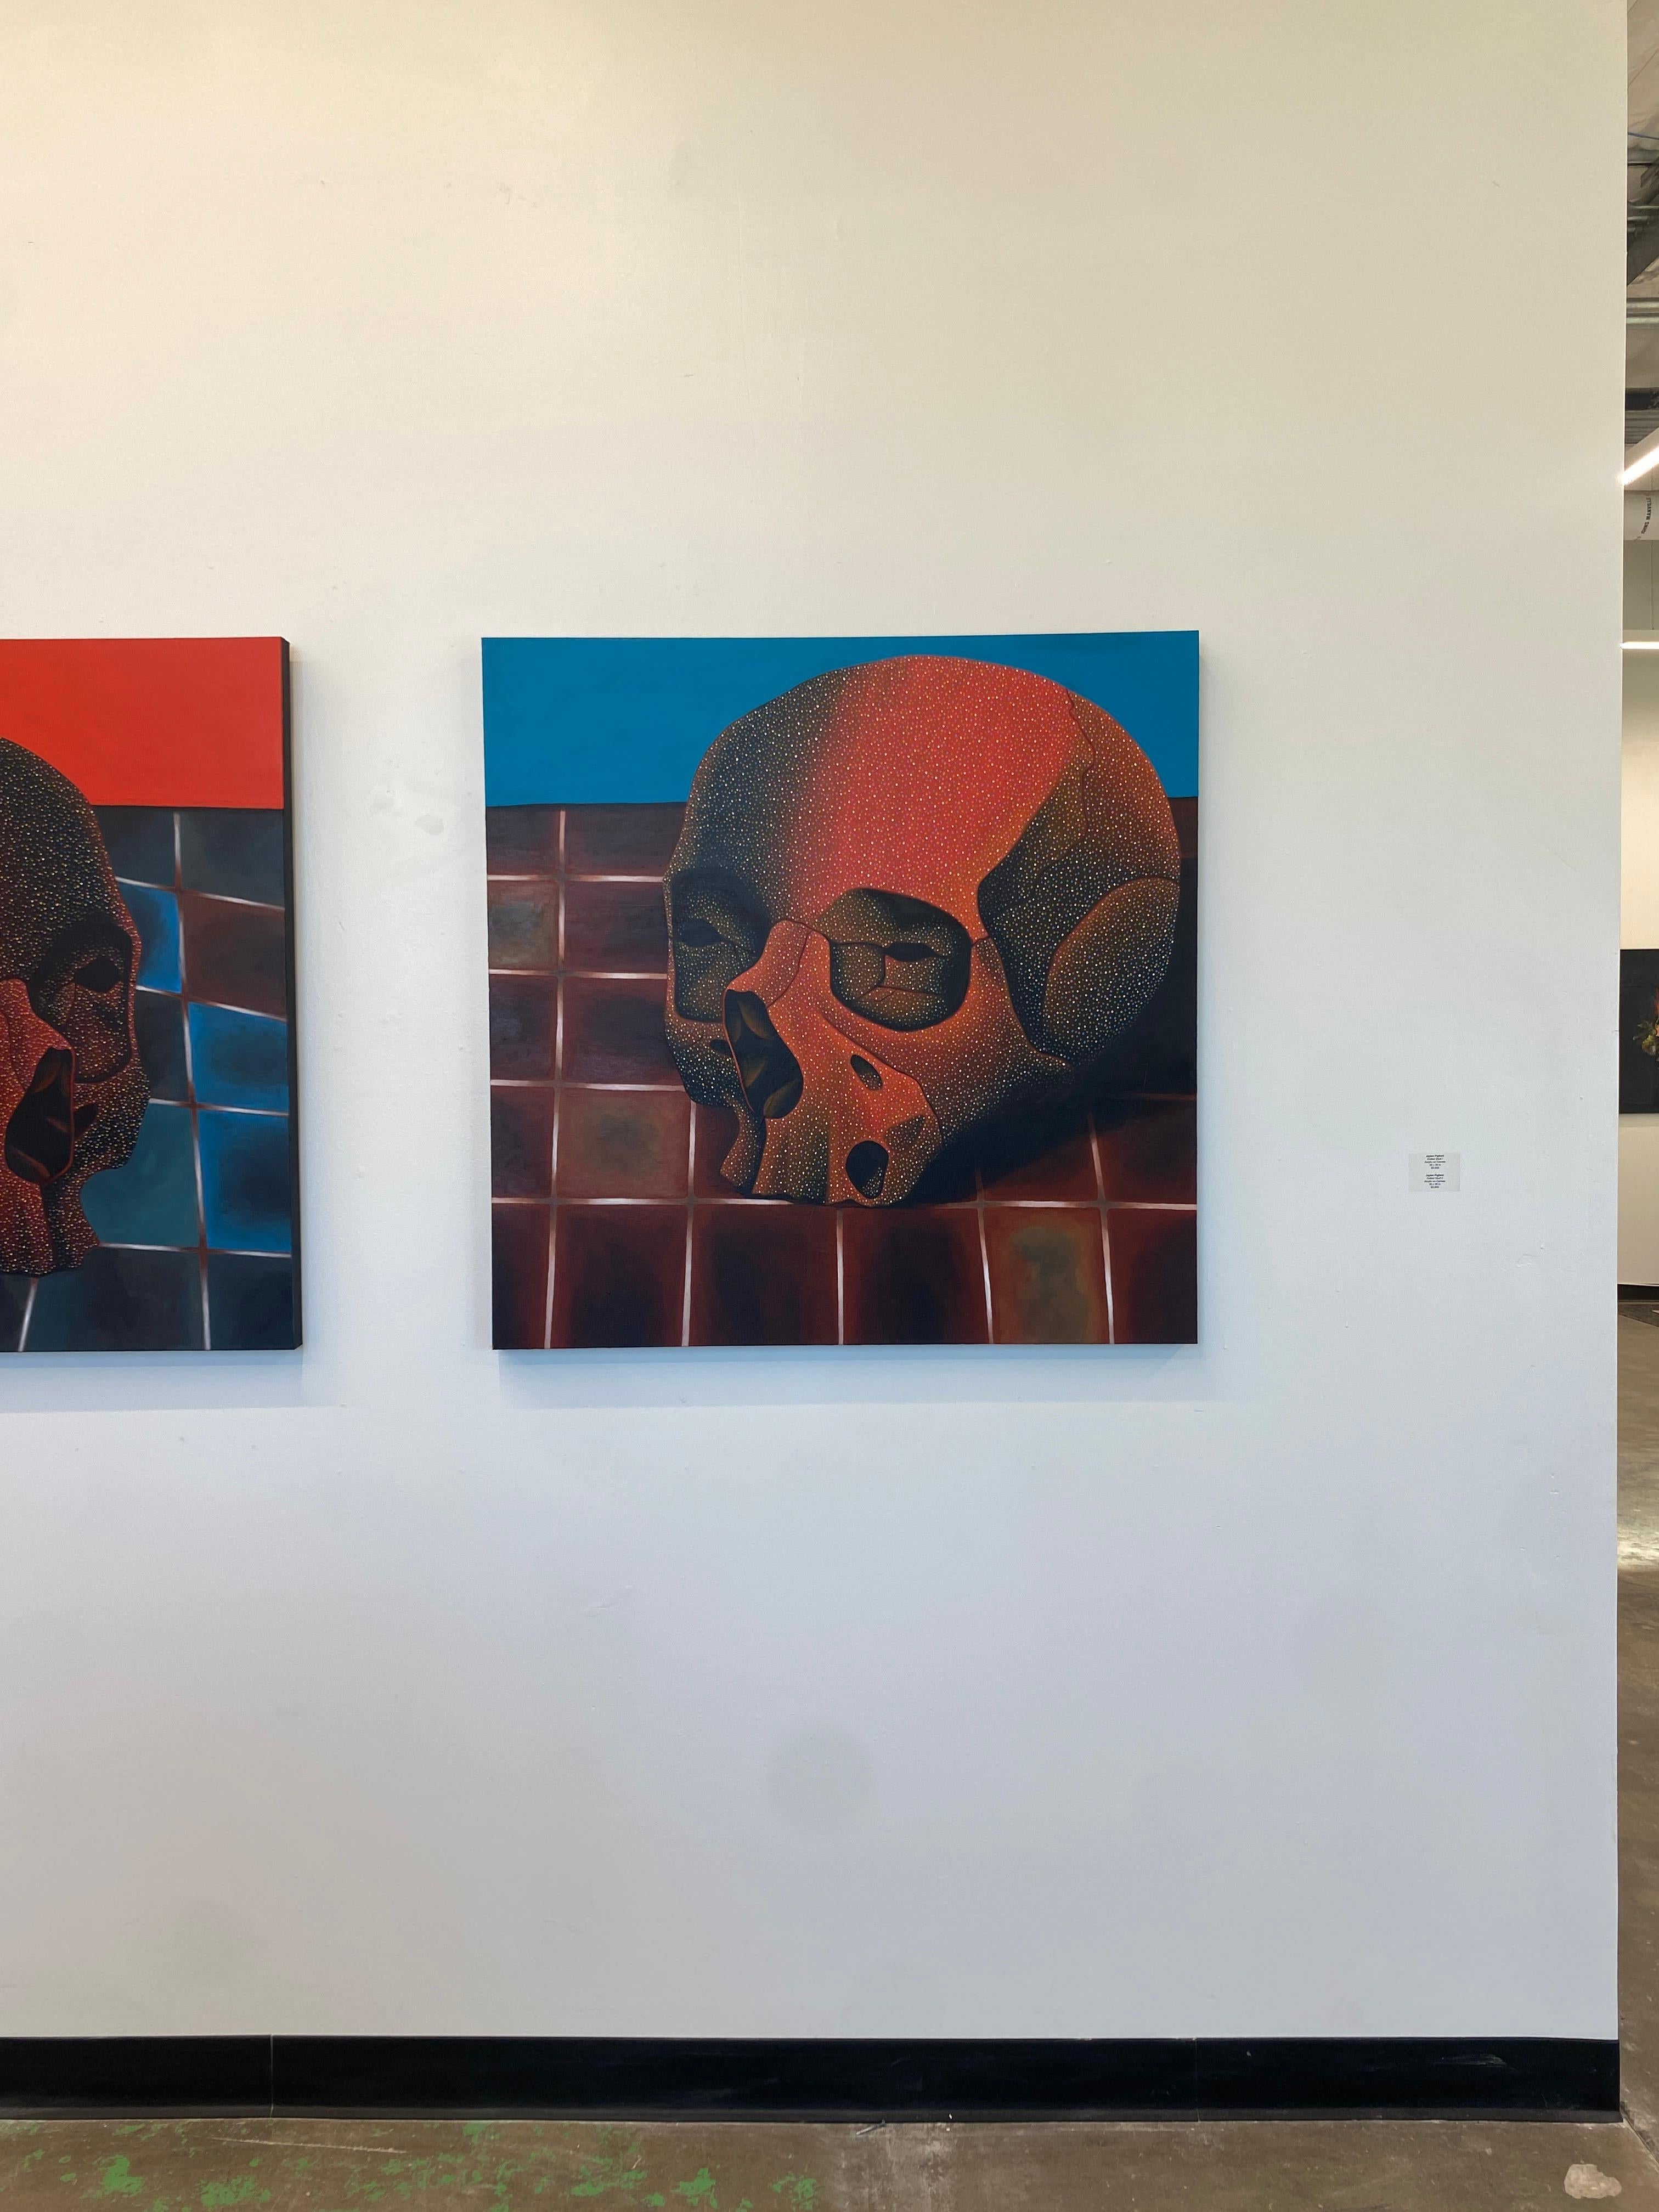 In this latest series of work, Pigford carefully places familiar symbols that he has referenced throughout his career within colorful but unknown settings. Pigford appoints two protagonists; plants and skulls, as he contemplates the balance of life